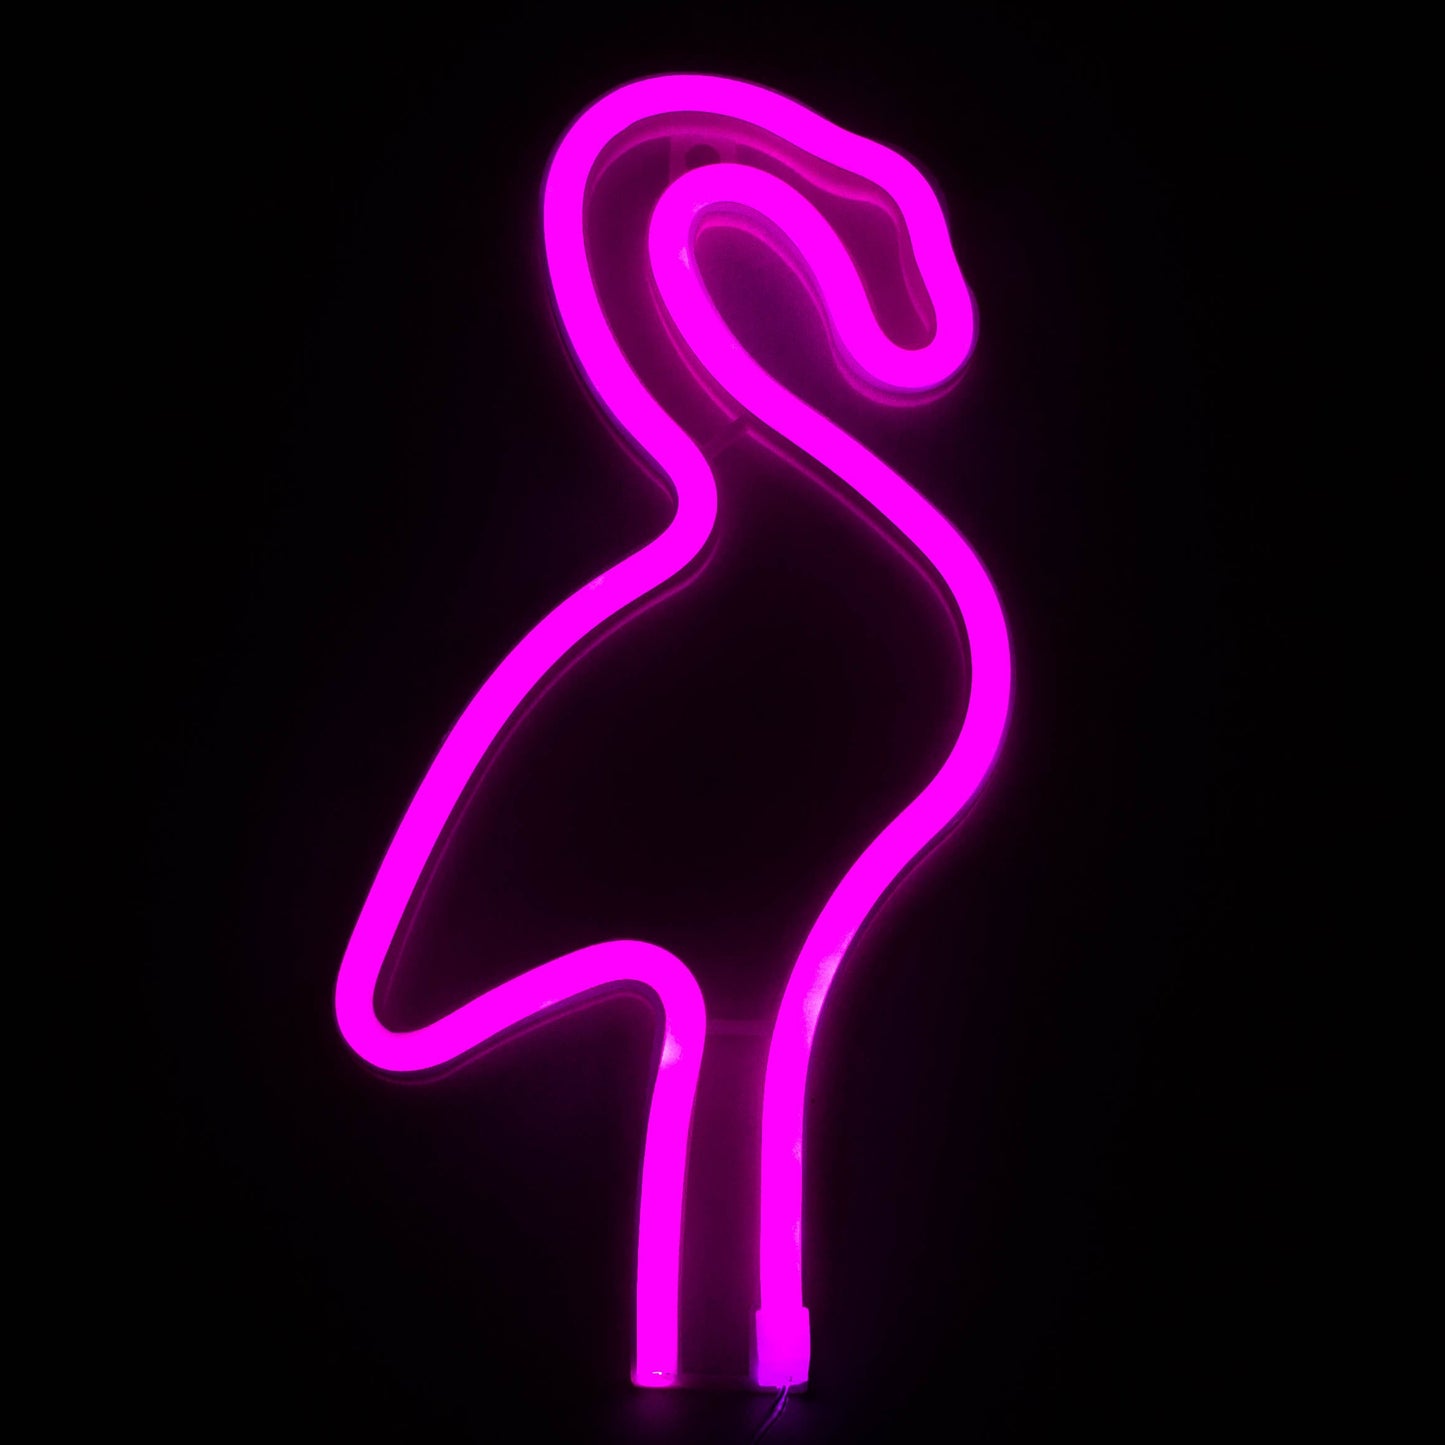 LED Neon Decoration Signs - Animal Collections_1